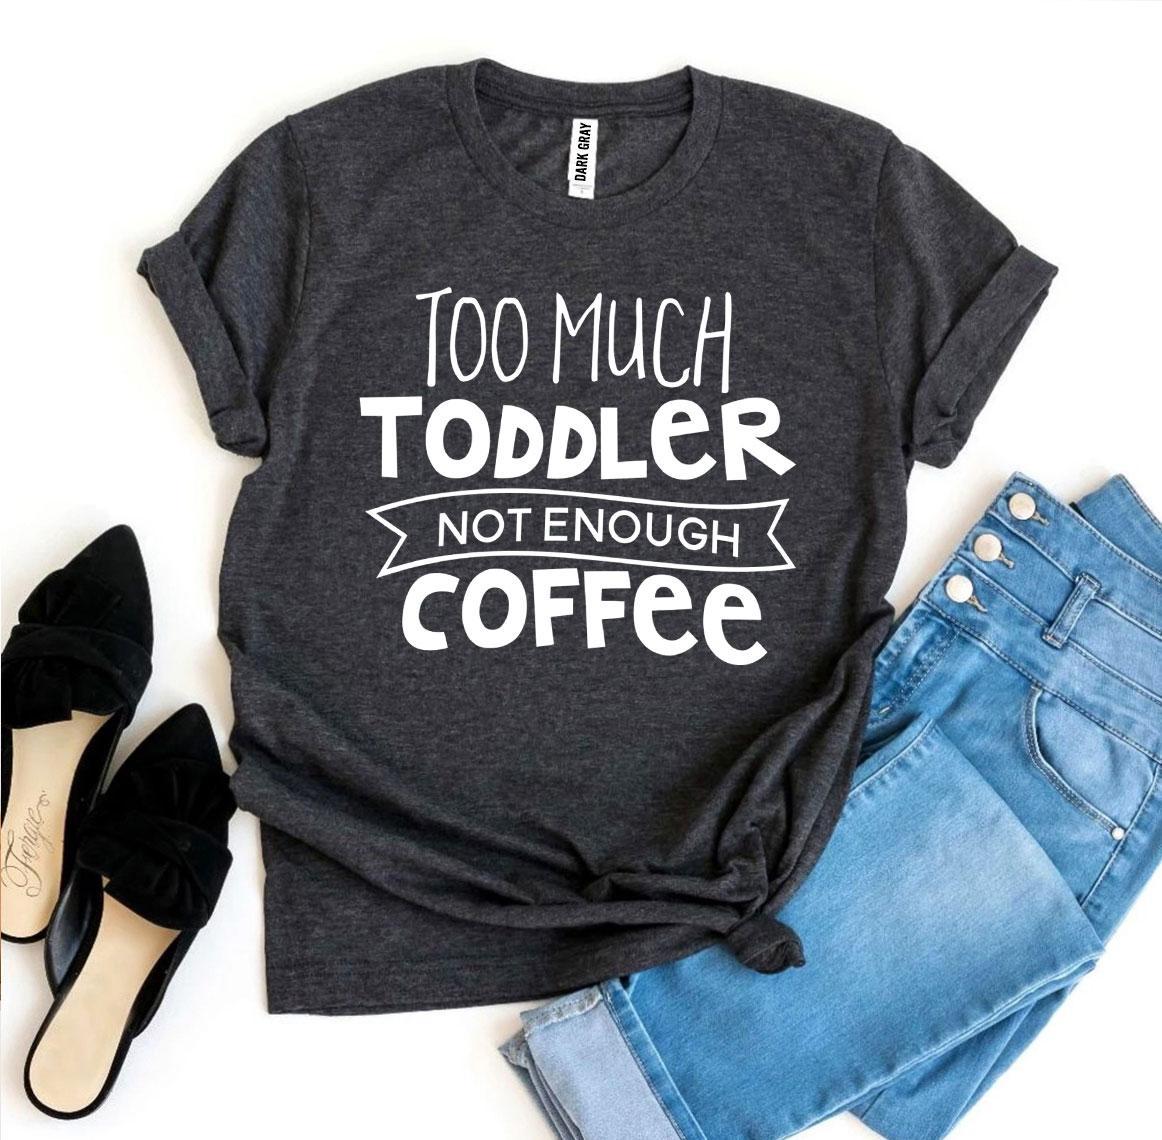 Too Much Toddler Not Enough Coffee T-shirt - G&K's